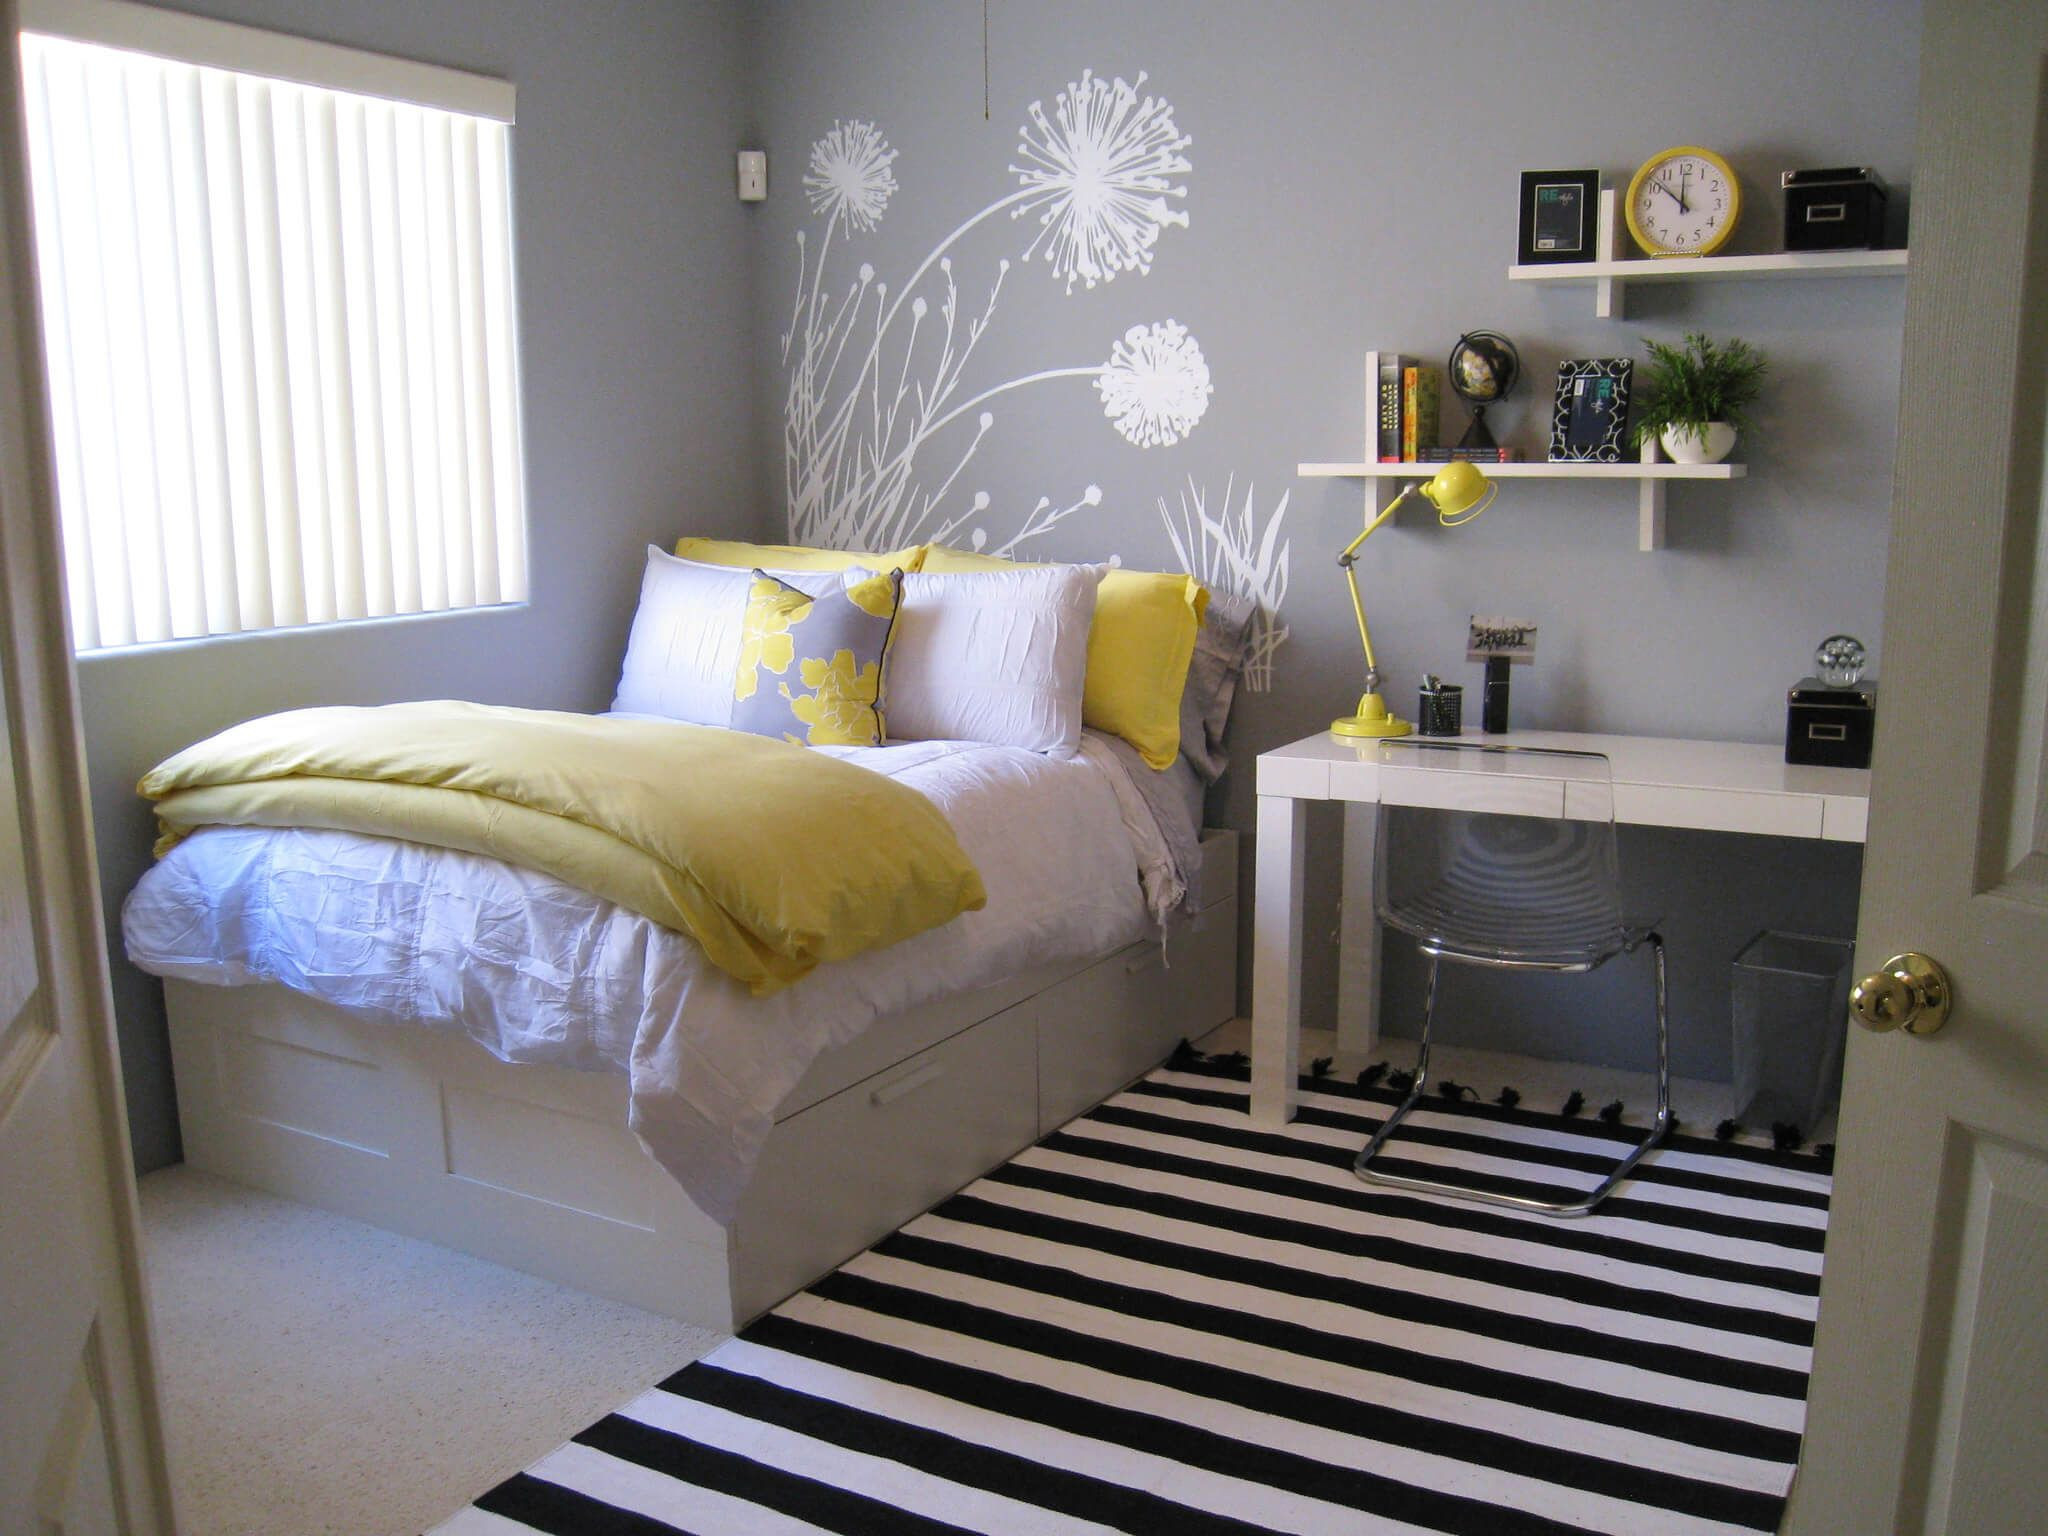 Paint Ideas For Small Bedroom
 Pin on For the Home